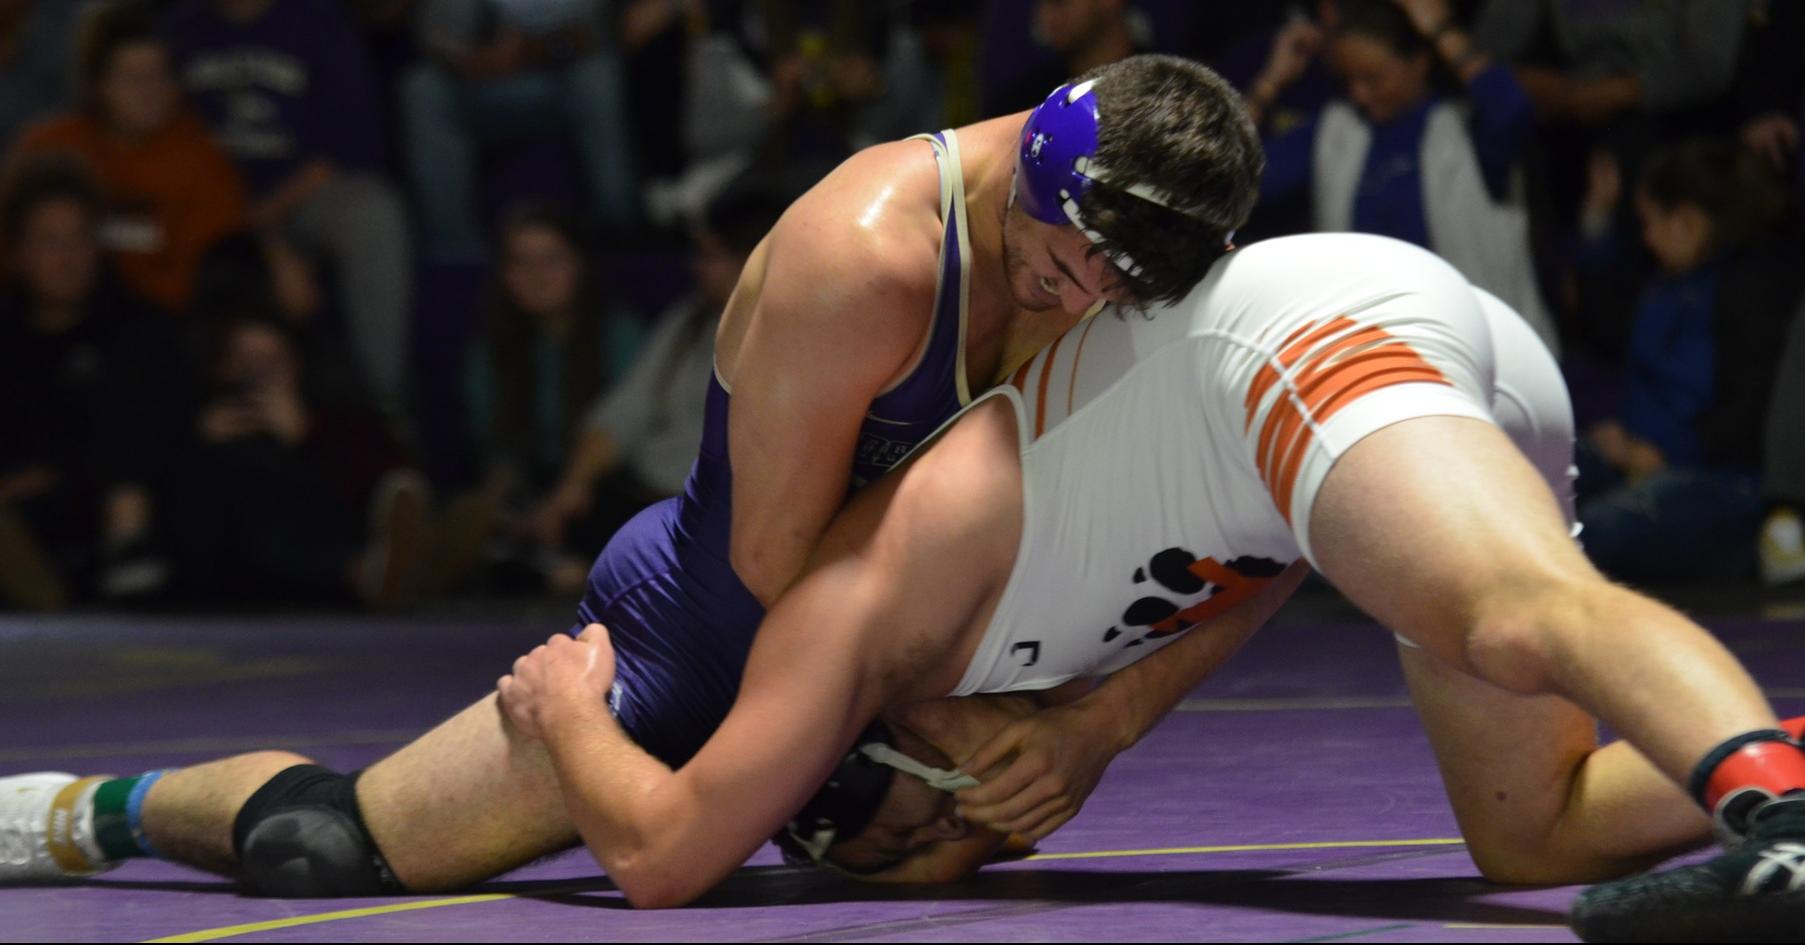 Defiance falls to Lourdes in home dual